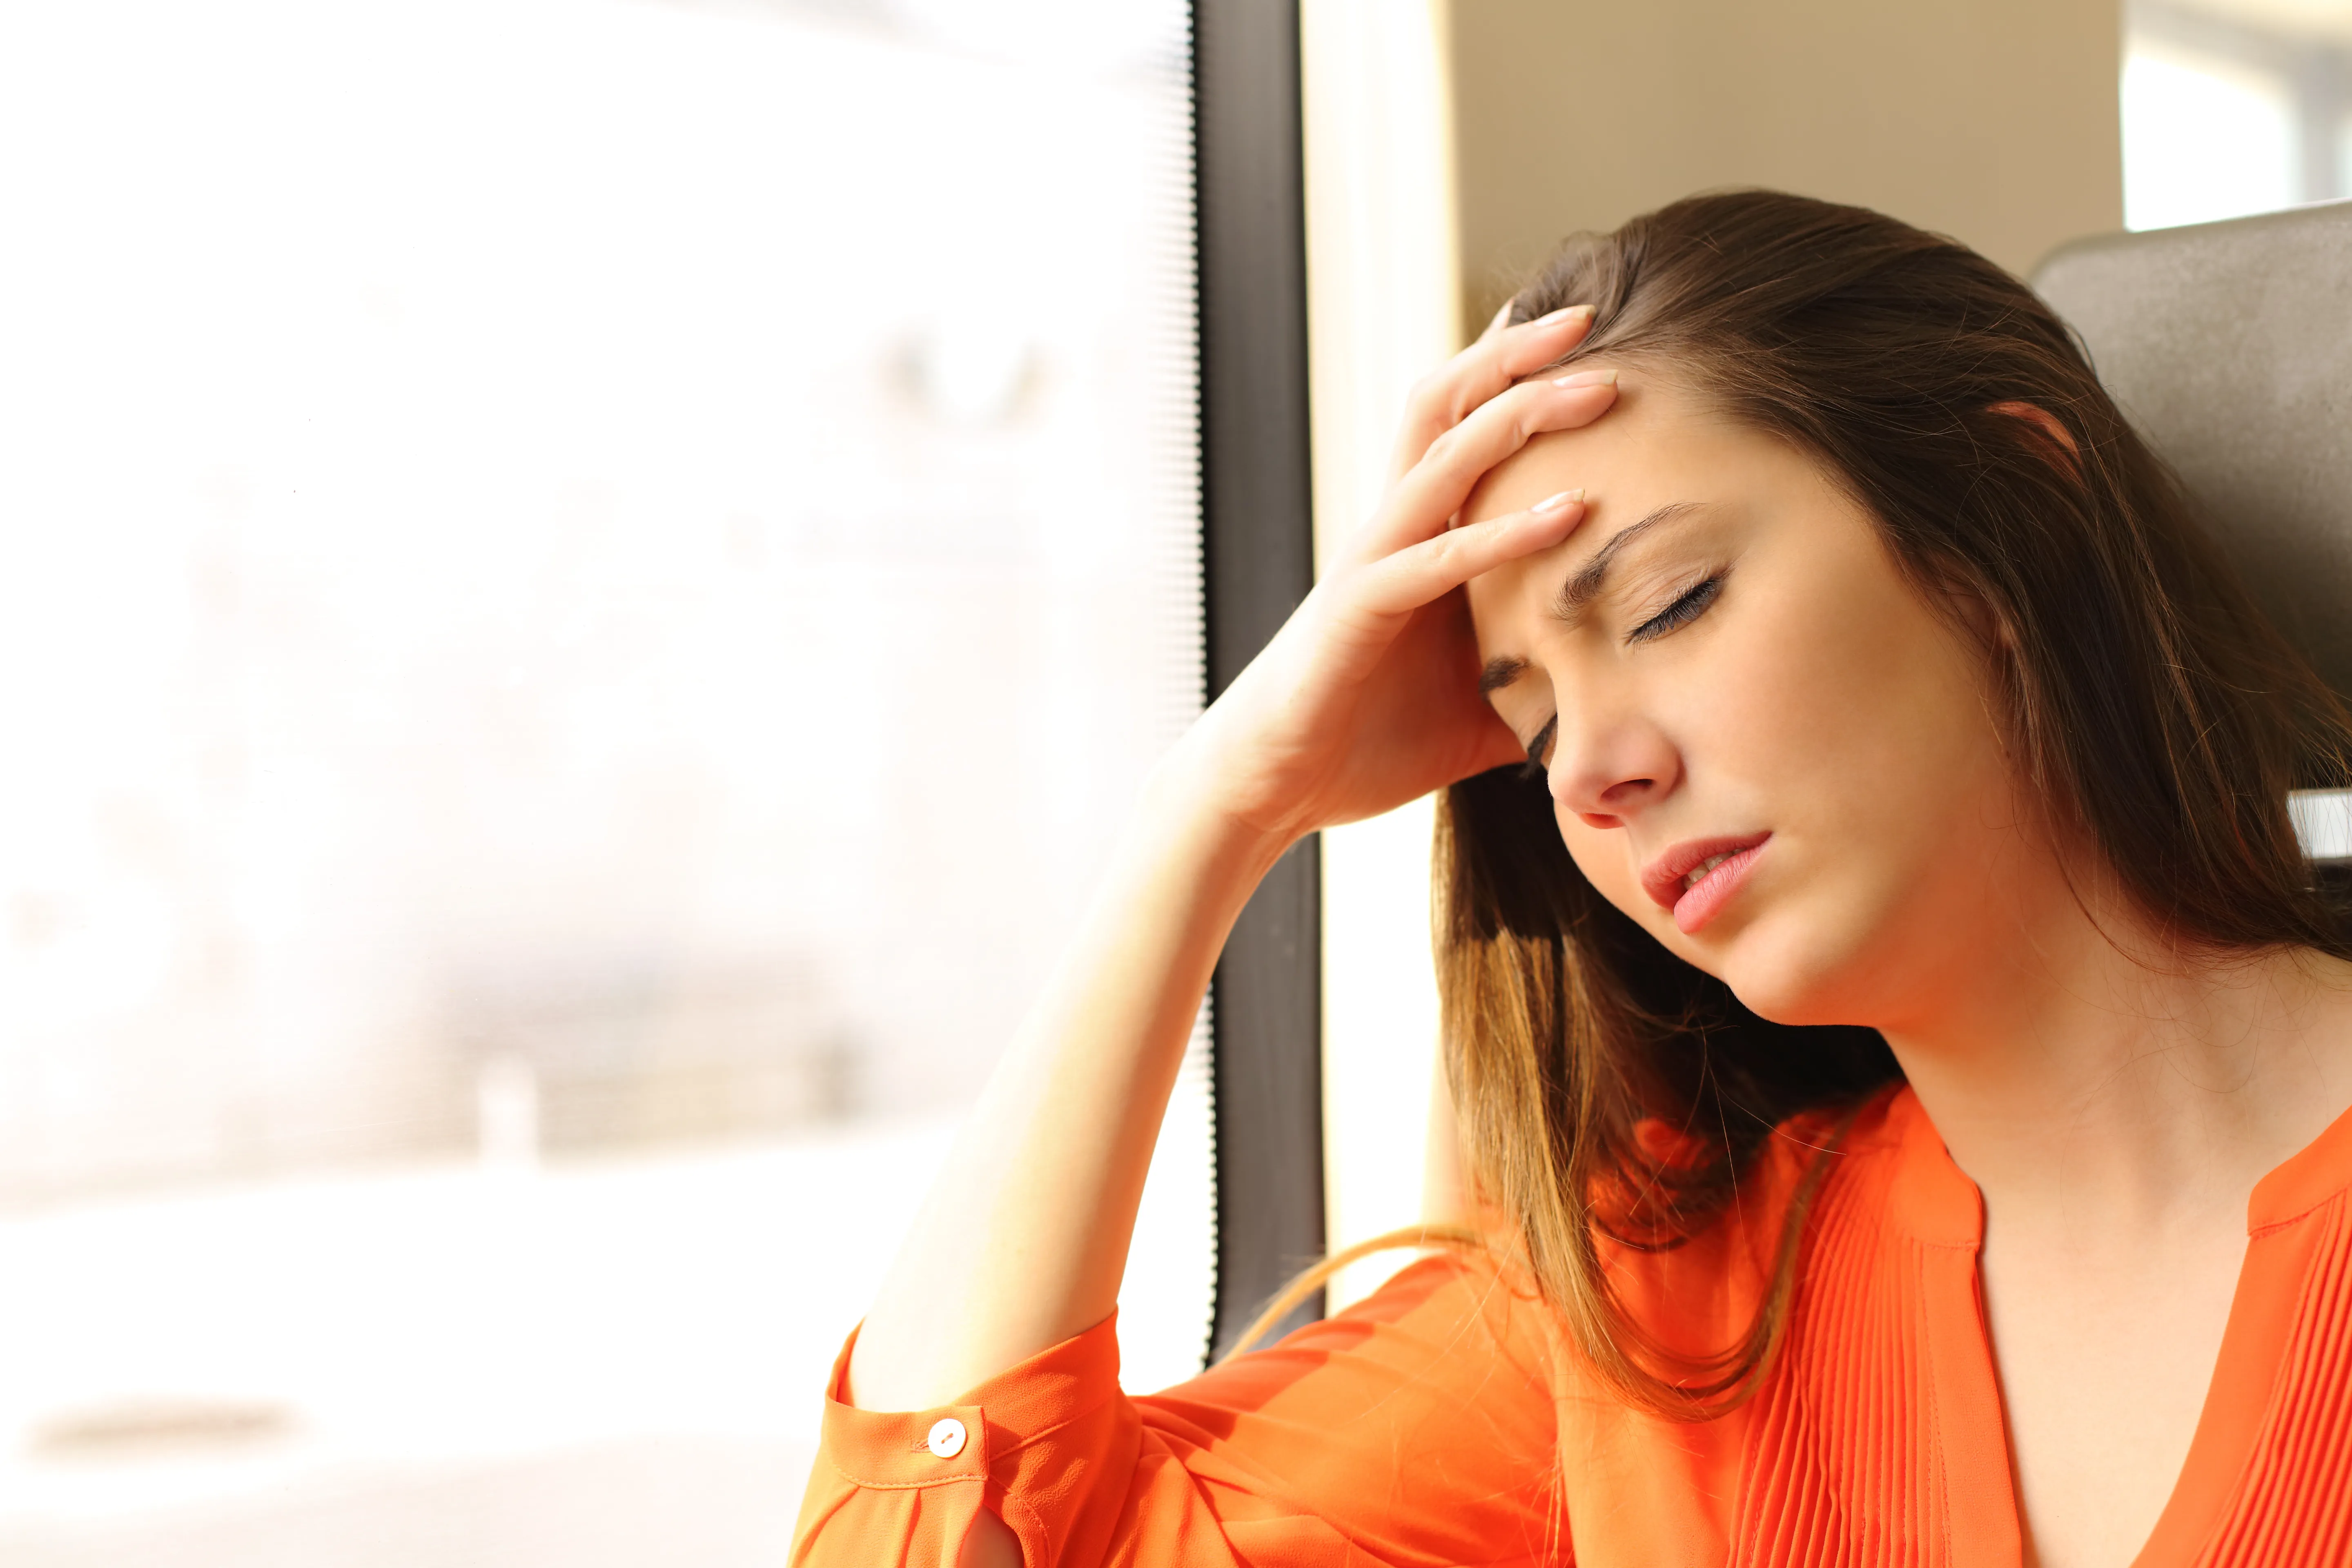 18 Health Reasons for Dizziness That Will Make Your Head Spin